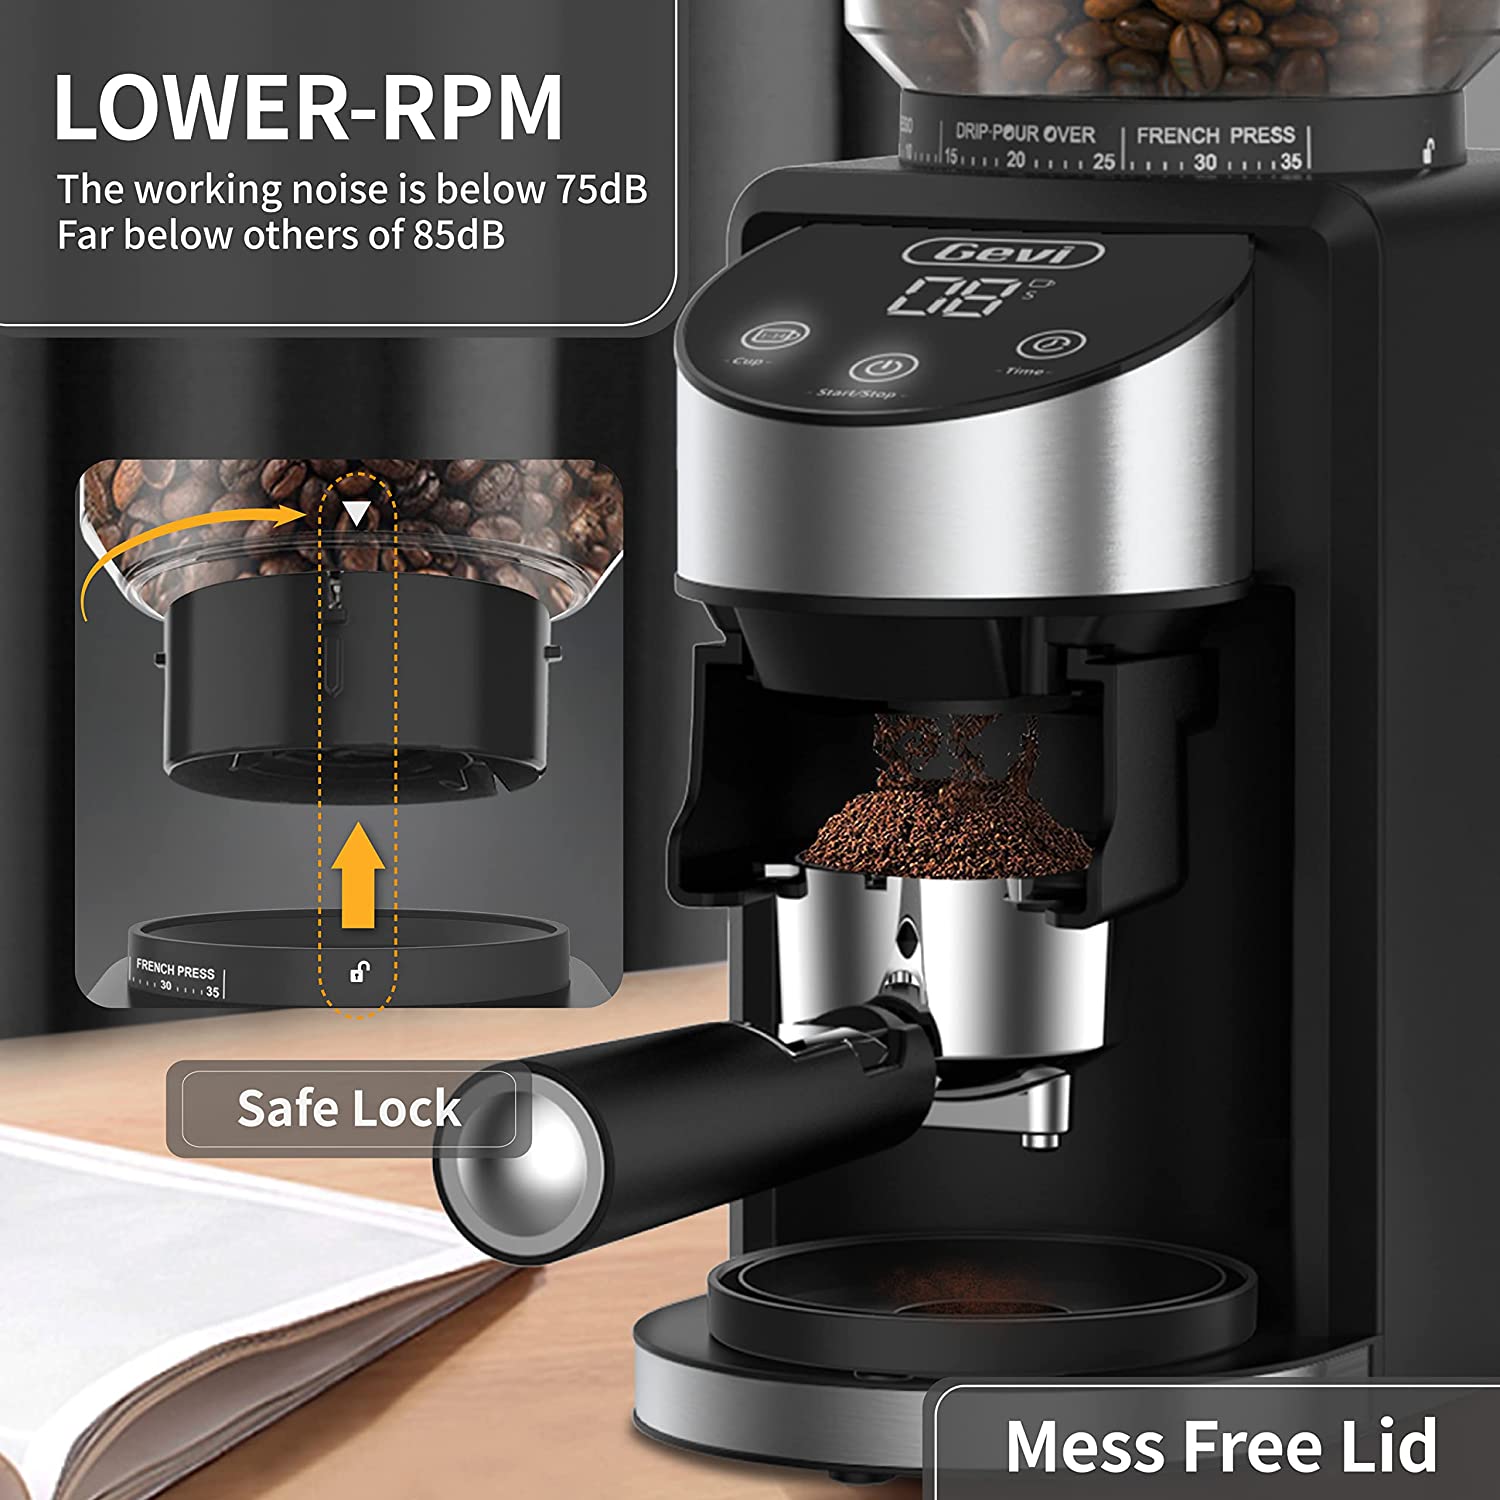  Conical Burr Coffee Grinder, Anti-Static Electric Coffee Bean  Grinder for Mess-Free Use, Automatic Coffee Grinder with 35 Settings for  Espresso, French Press, Pour Over and Drip Brewing : Home & Kitchen